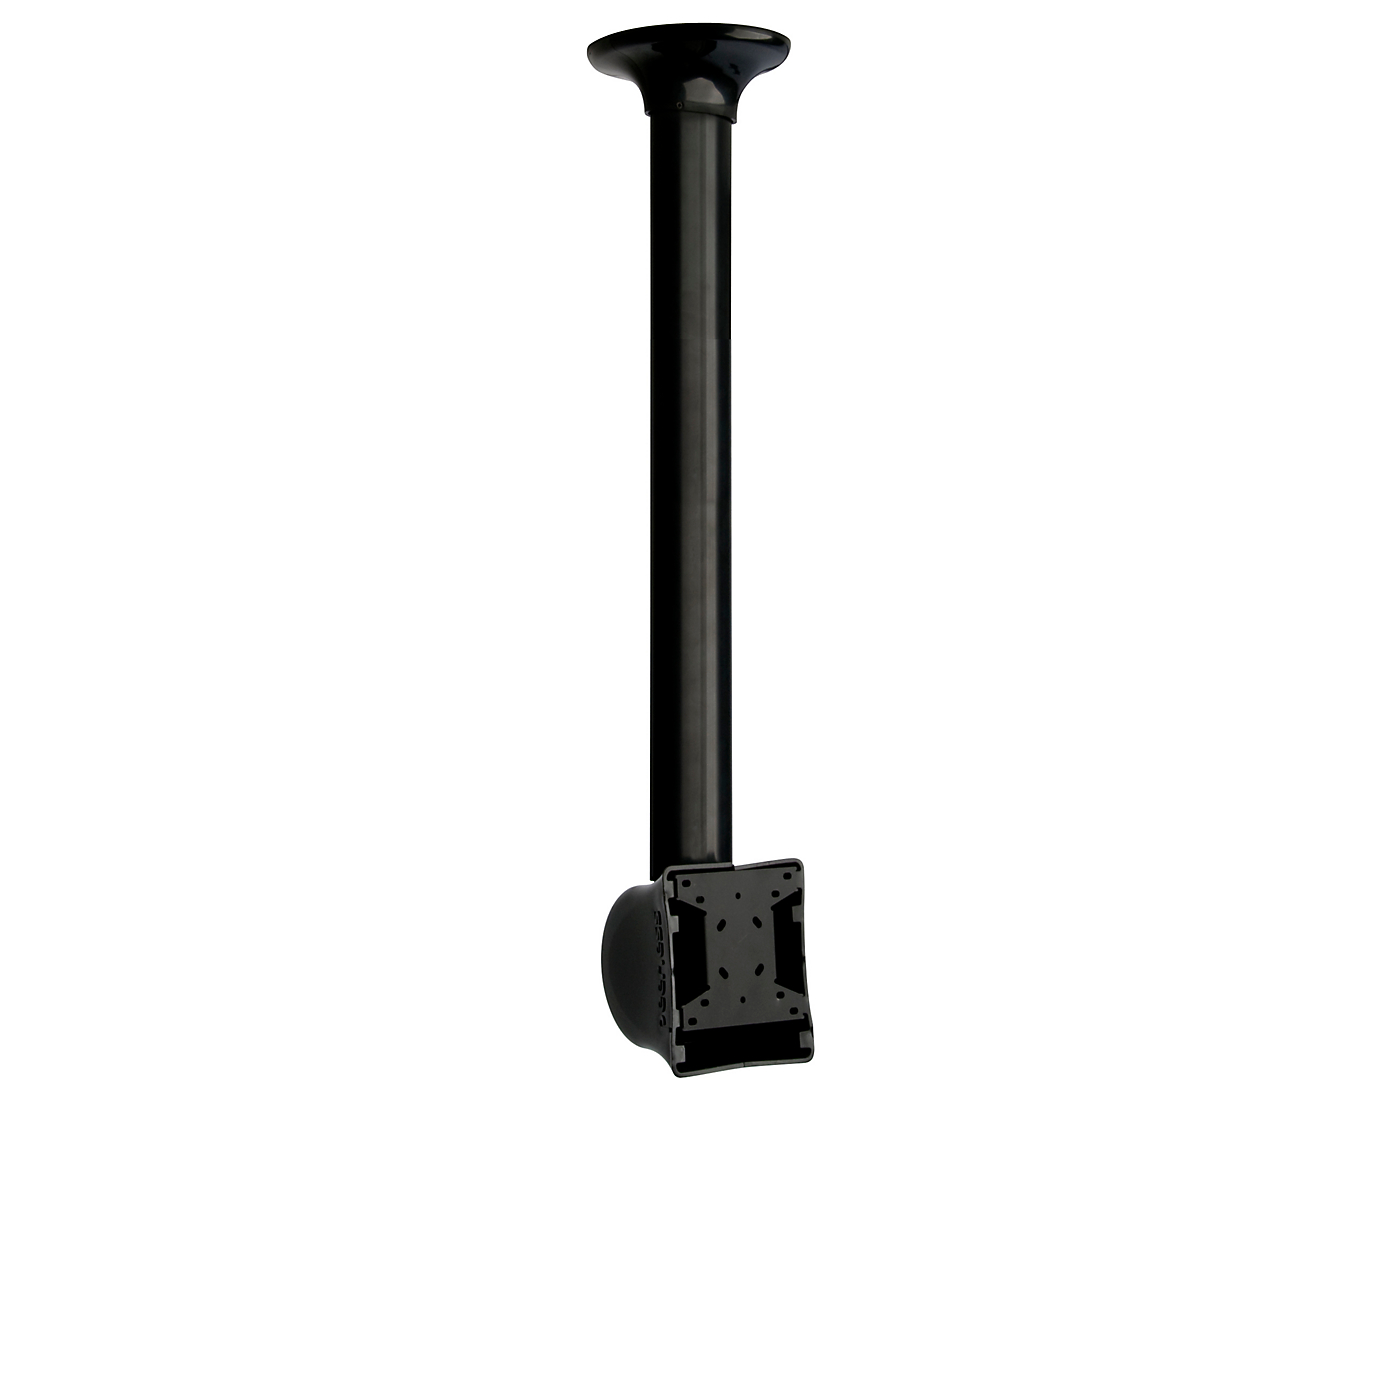 LCC-18-C Flat Panel Ceiling Mount with Cord Management Covers